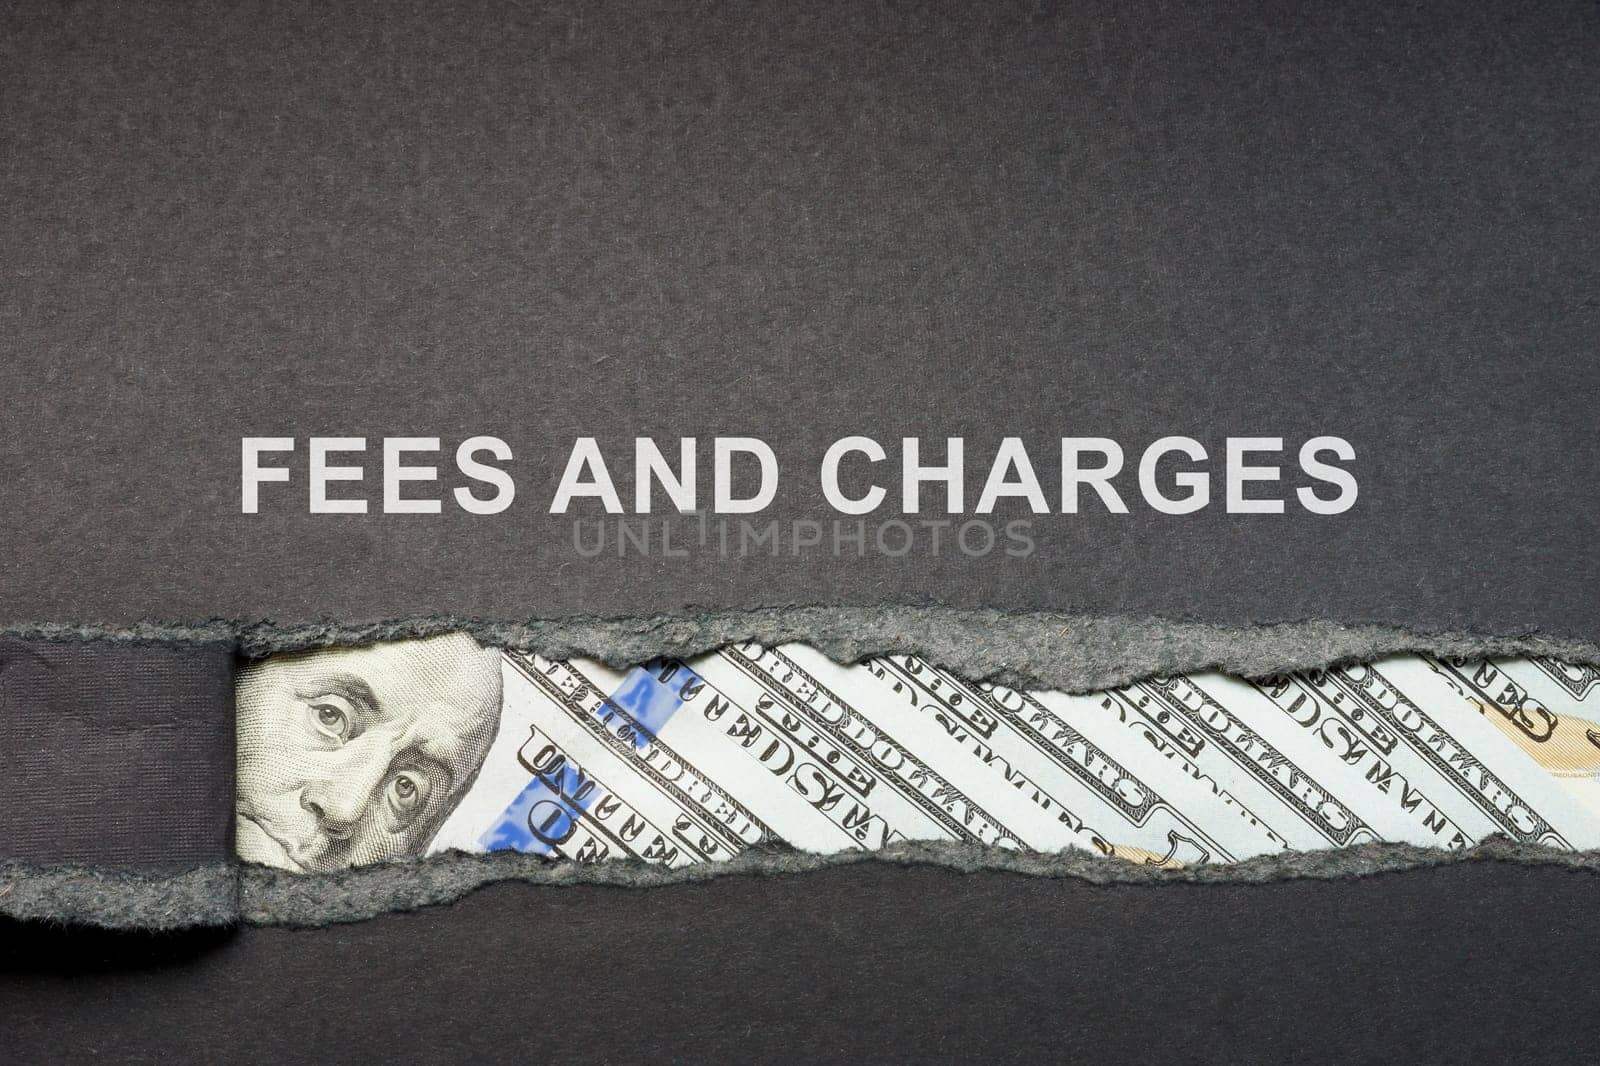 Fees and charges concept. Inscription and torn piece of paper.